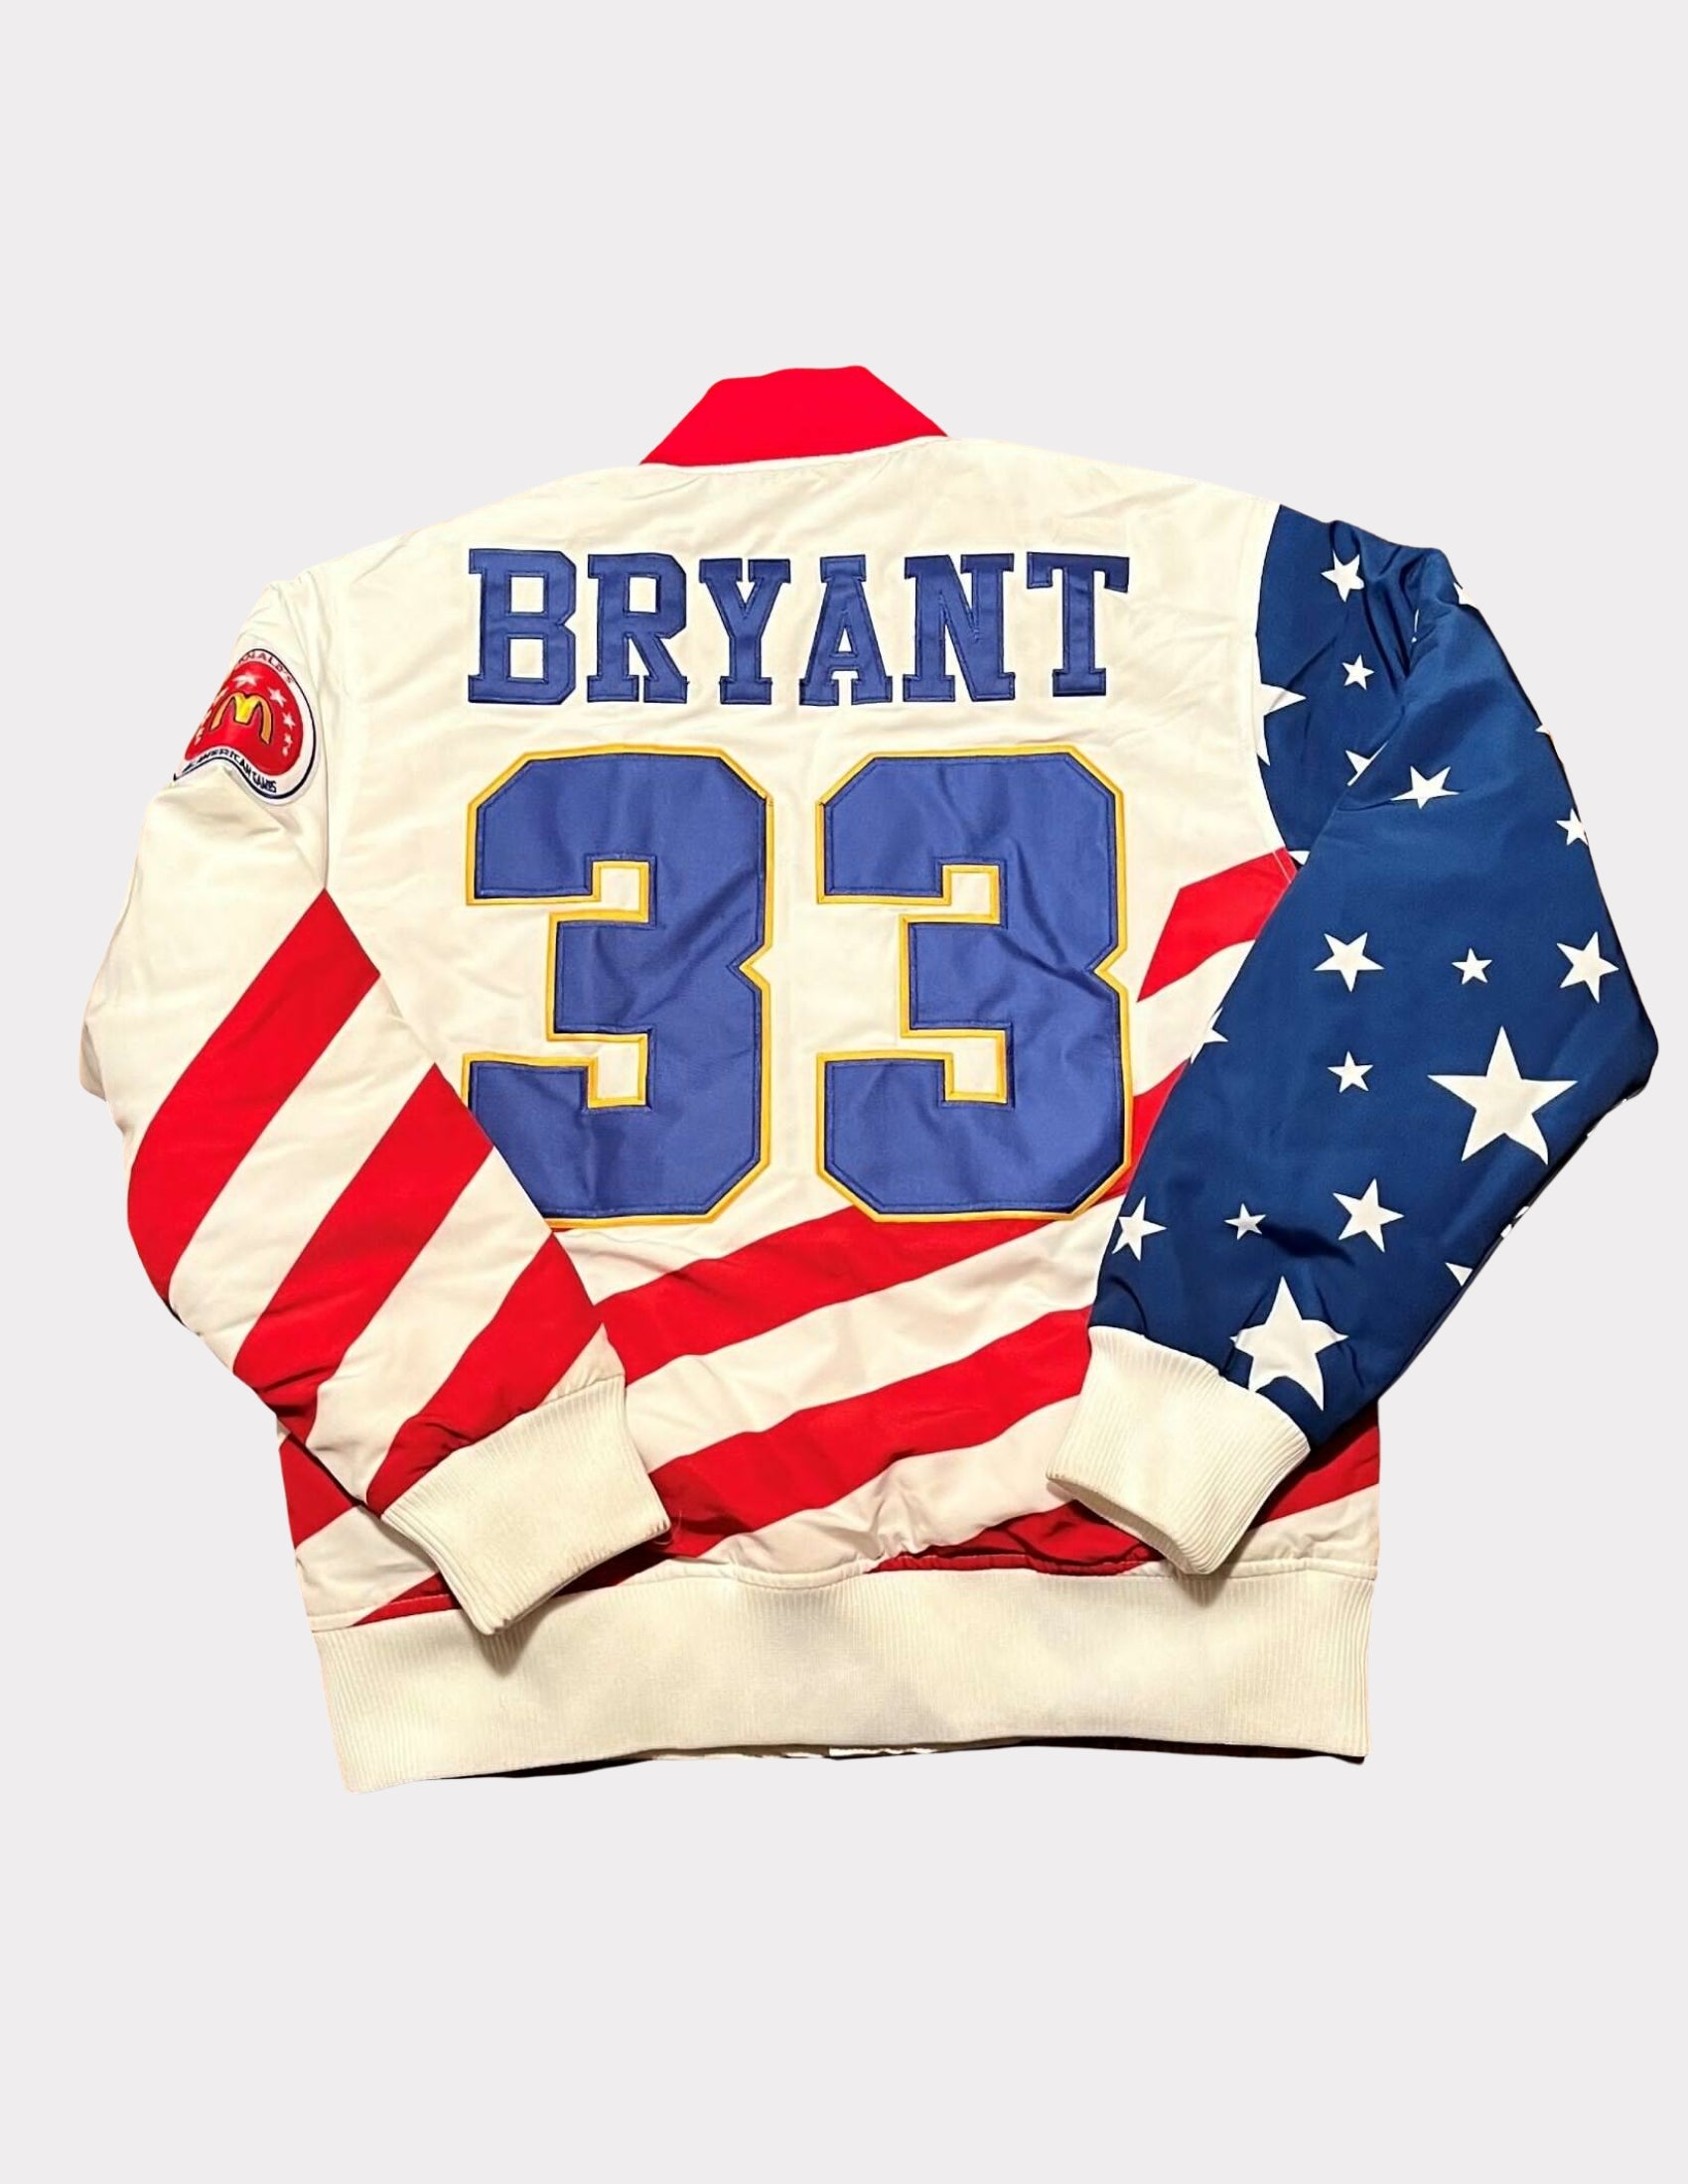 Kobe Bryant McDonald's All American Sewn Name Number Jersey